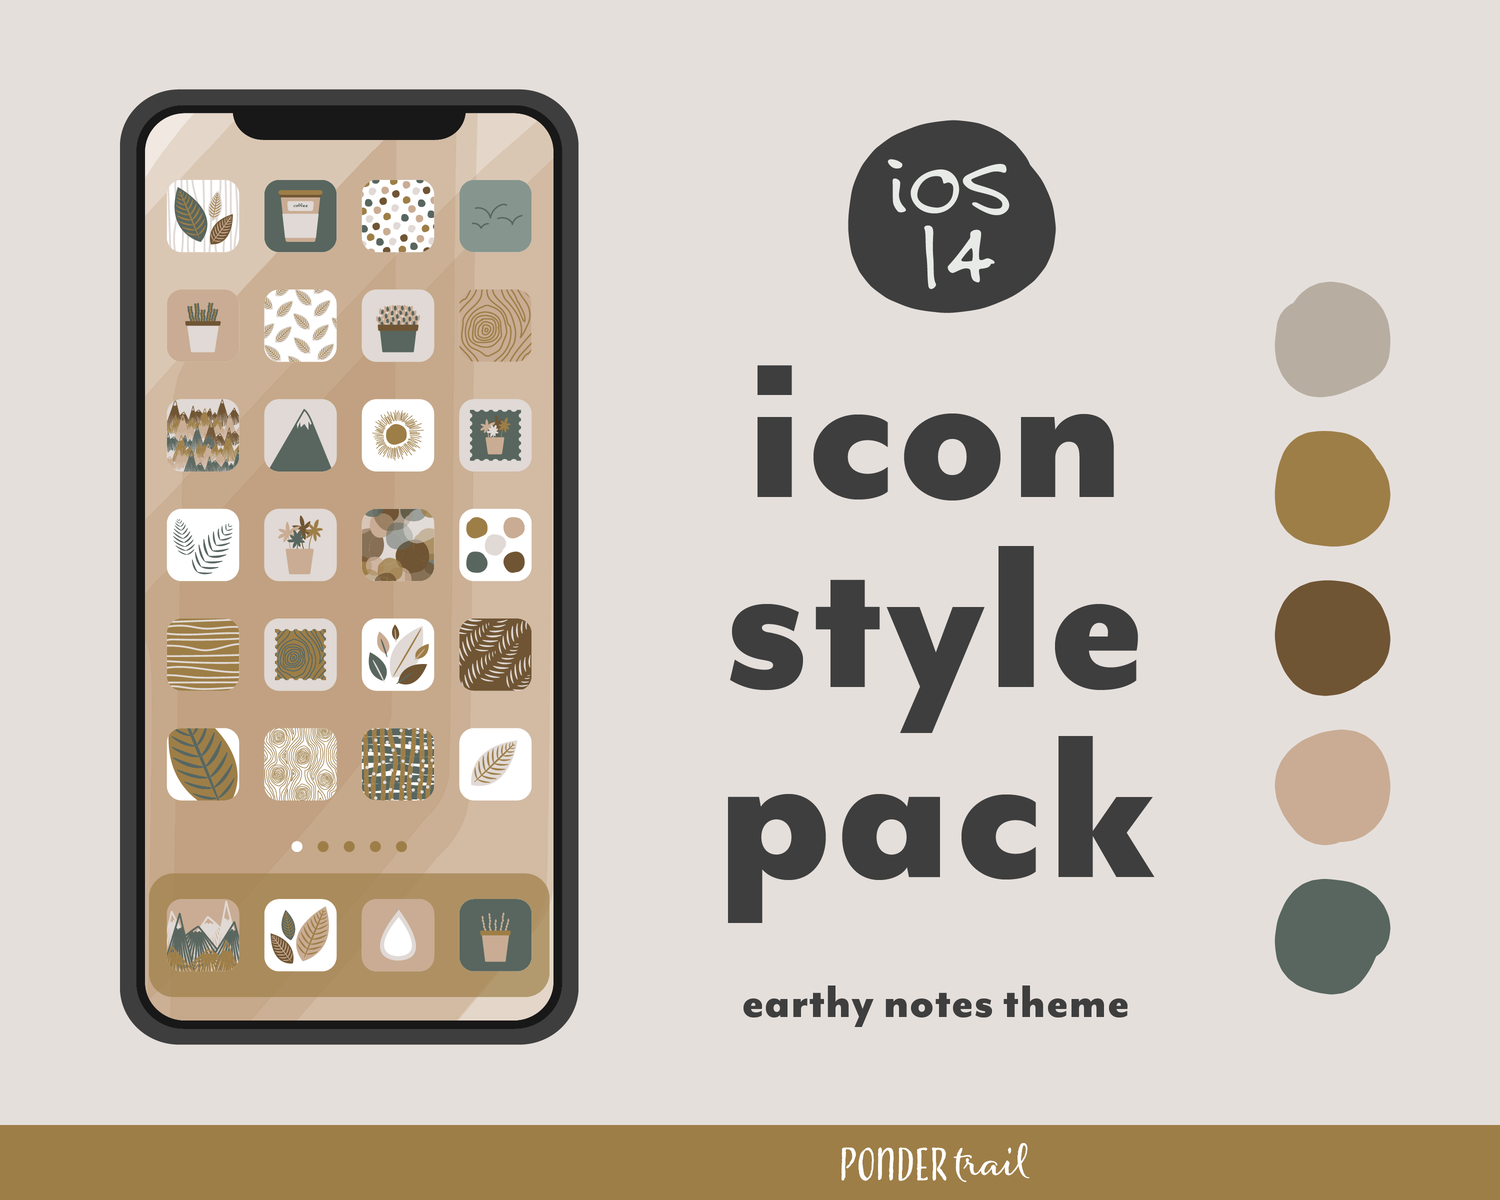 Ios 14 Aesthetic Style Pack App Covers Icons Wallpapers Earthy Notes Ponder Trail